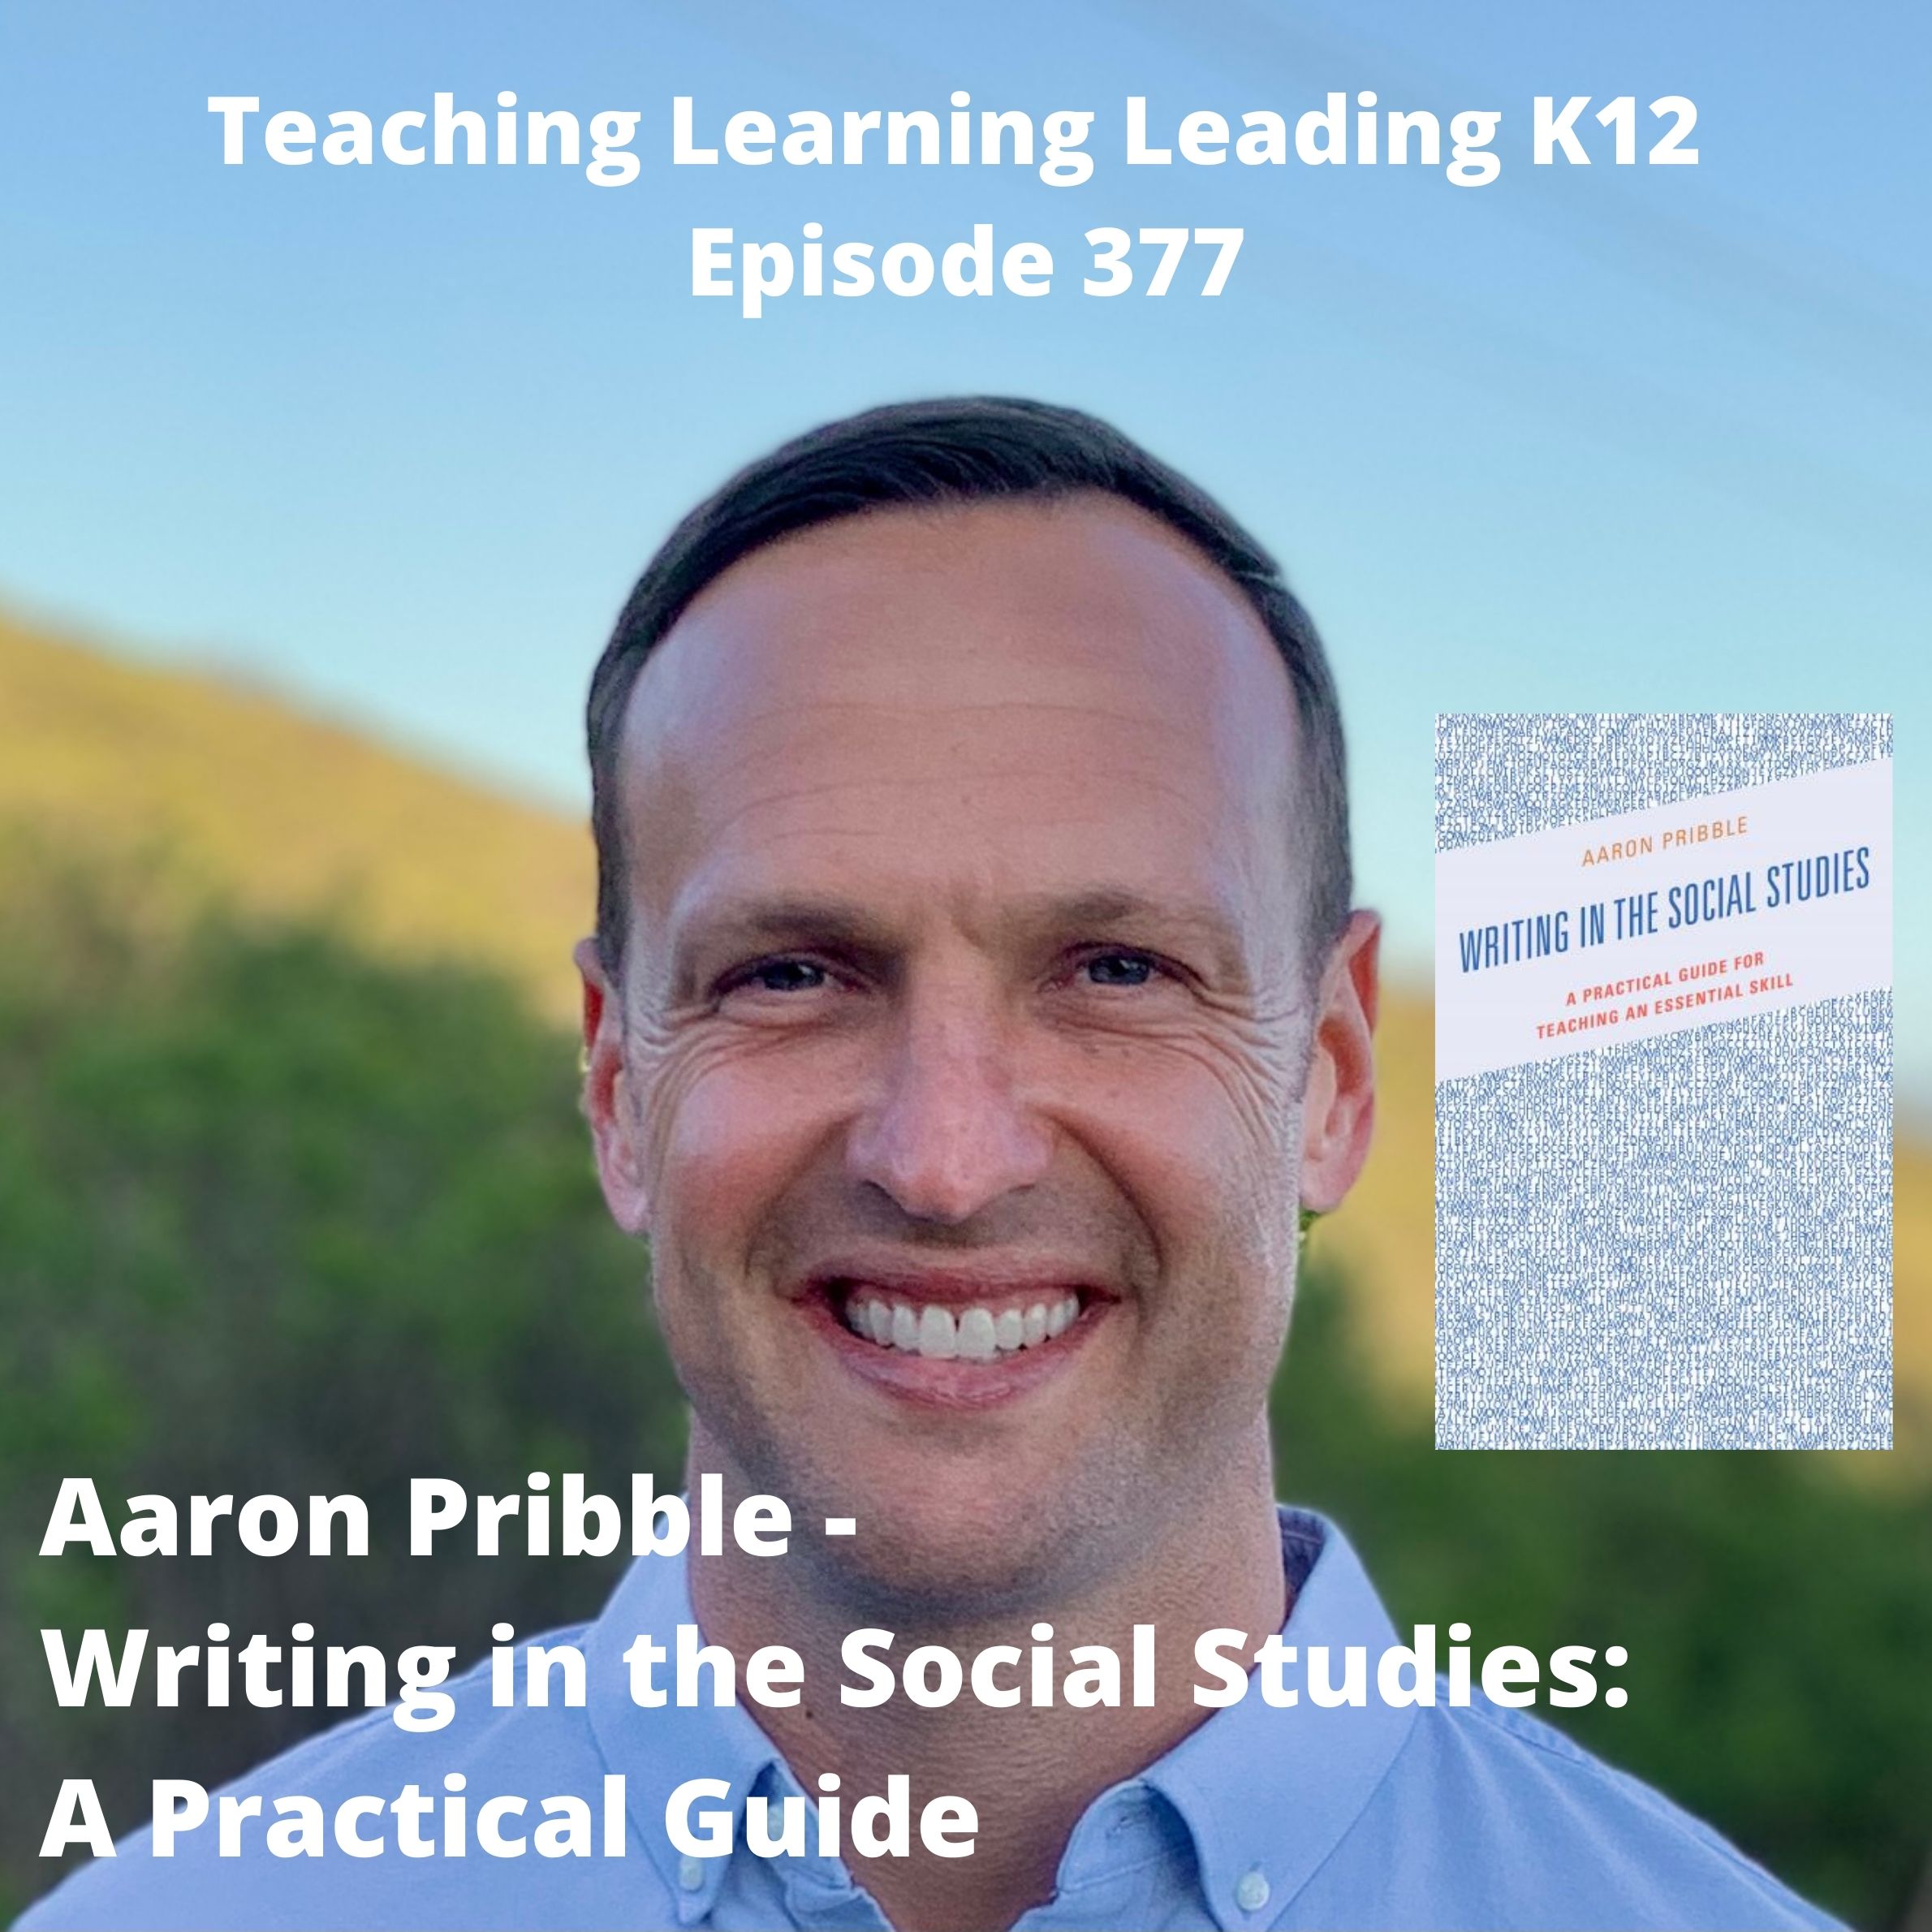 Aaron Pribble - Writing in the Social Studies: A Practical Guide - 377 Image